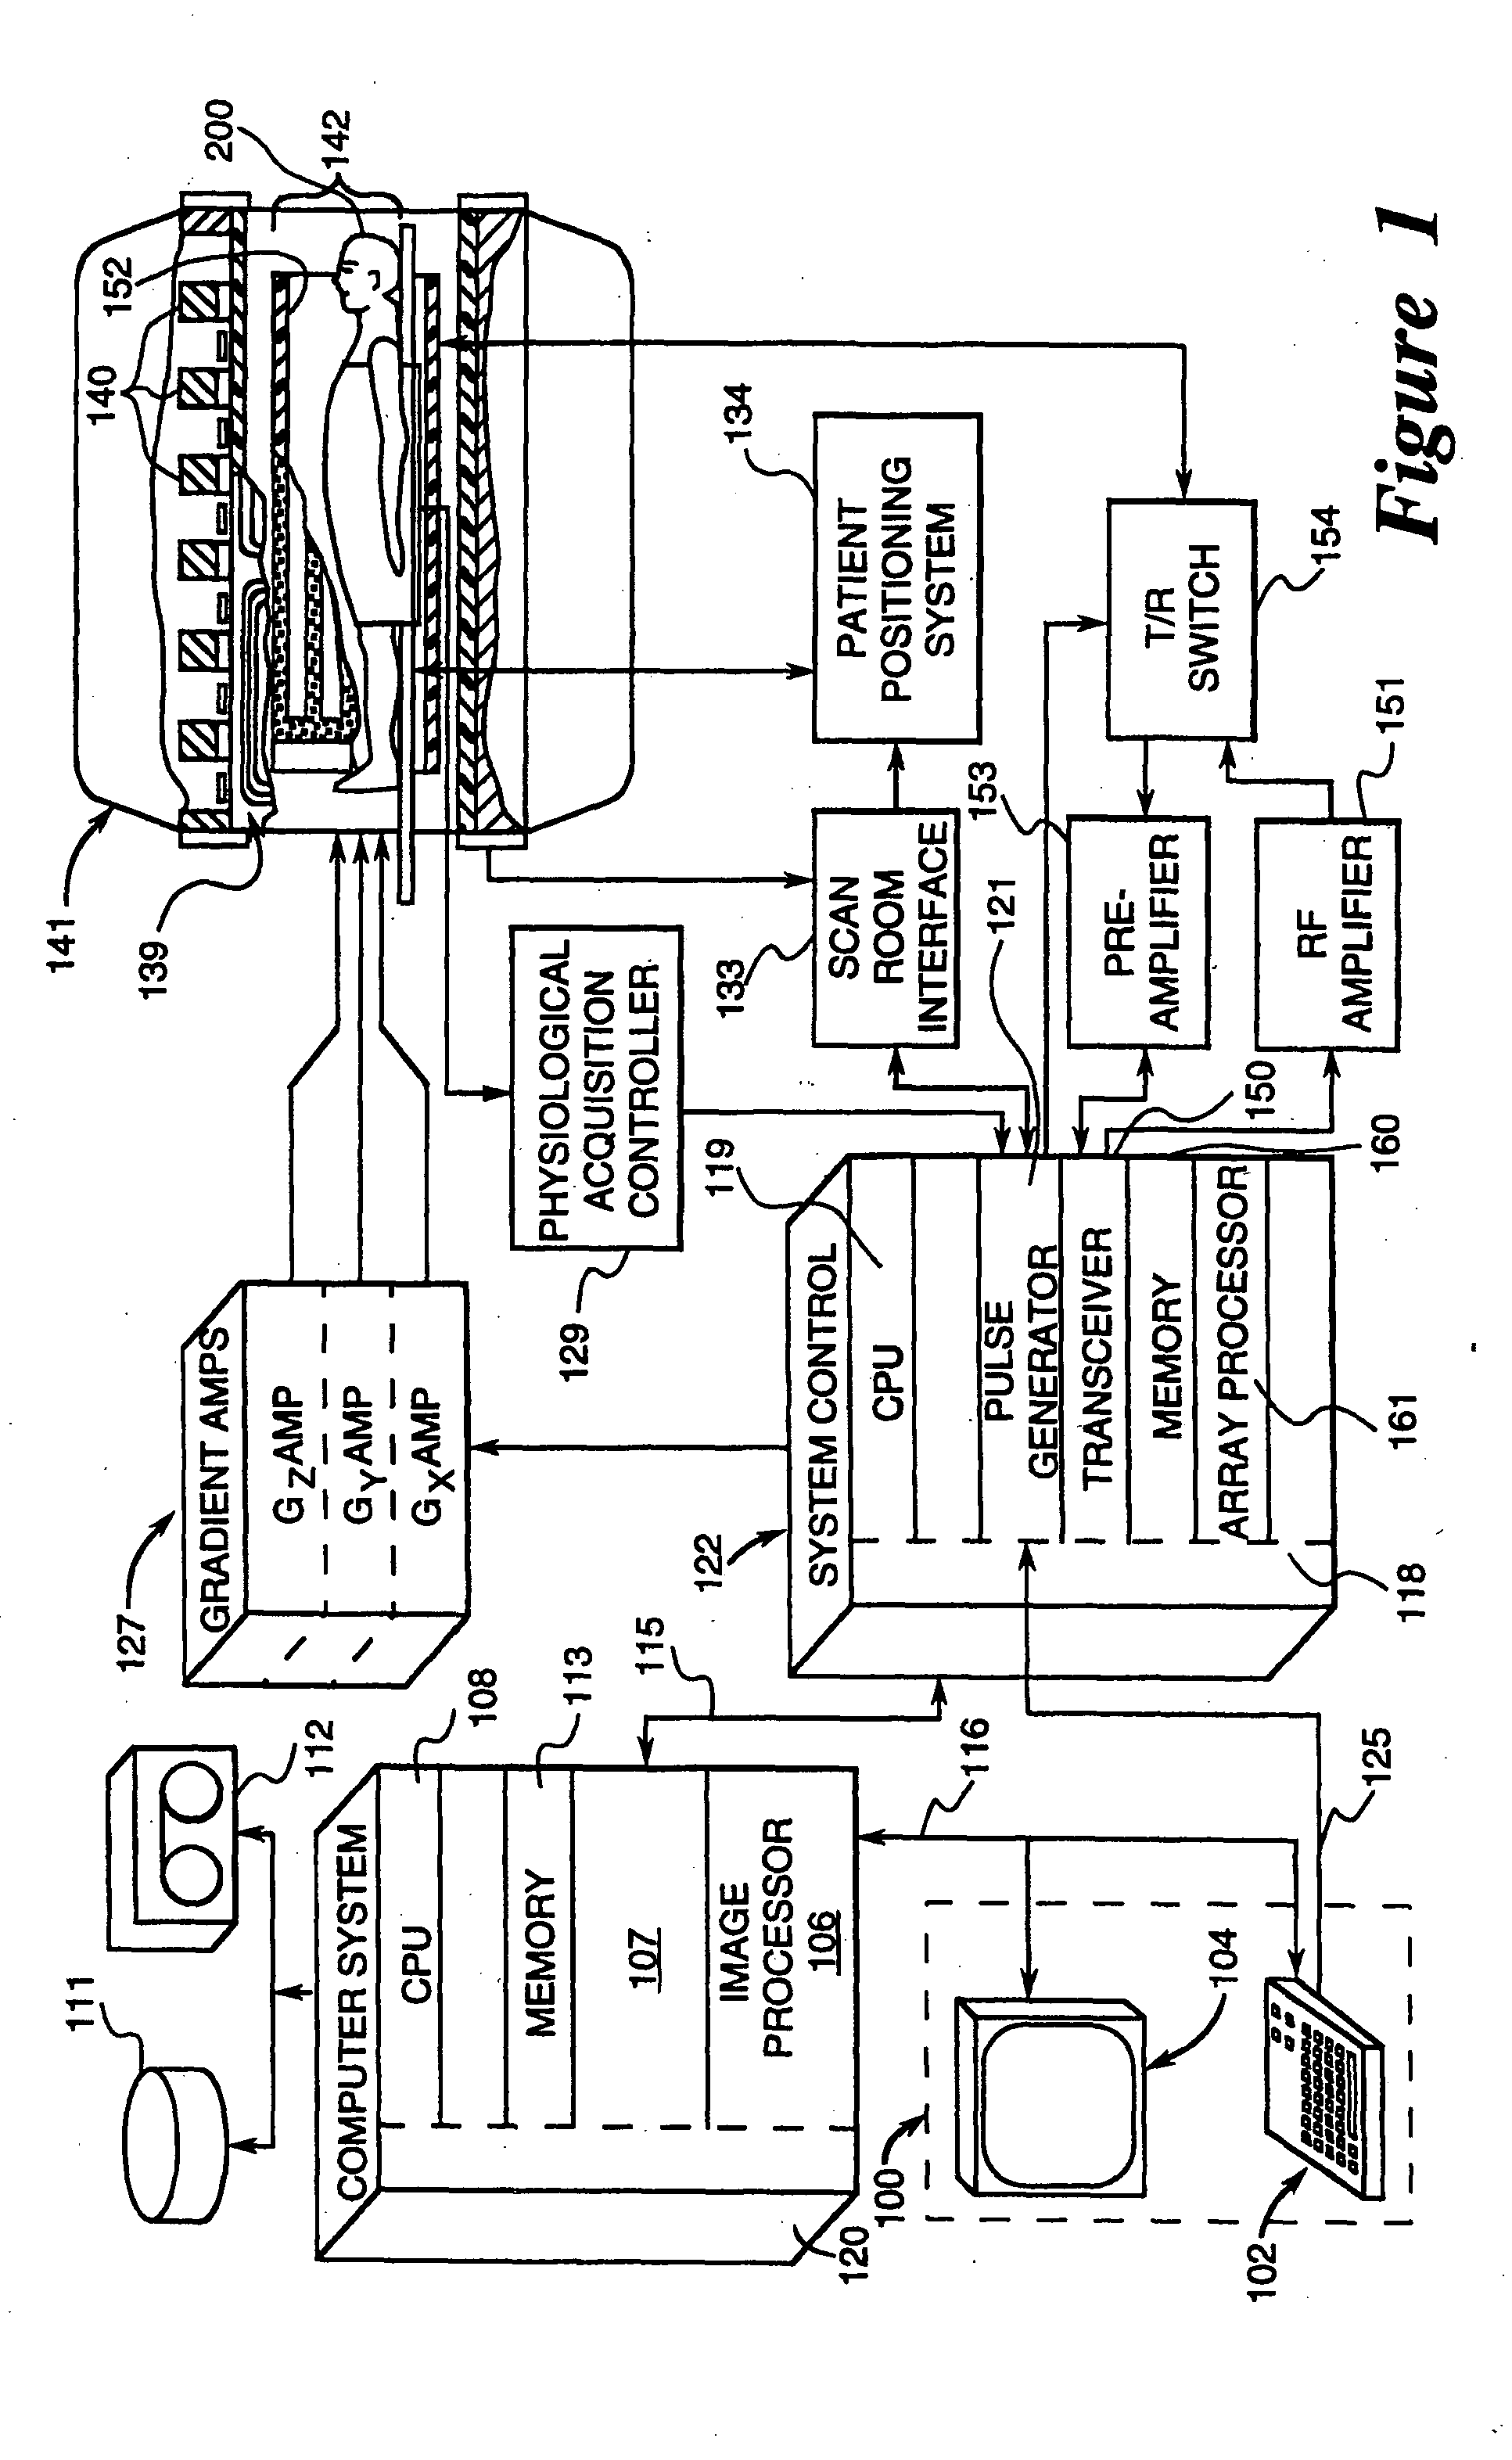 System and method for the detection of brain iron using magnetic resonance imaging